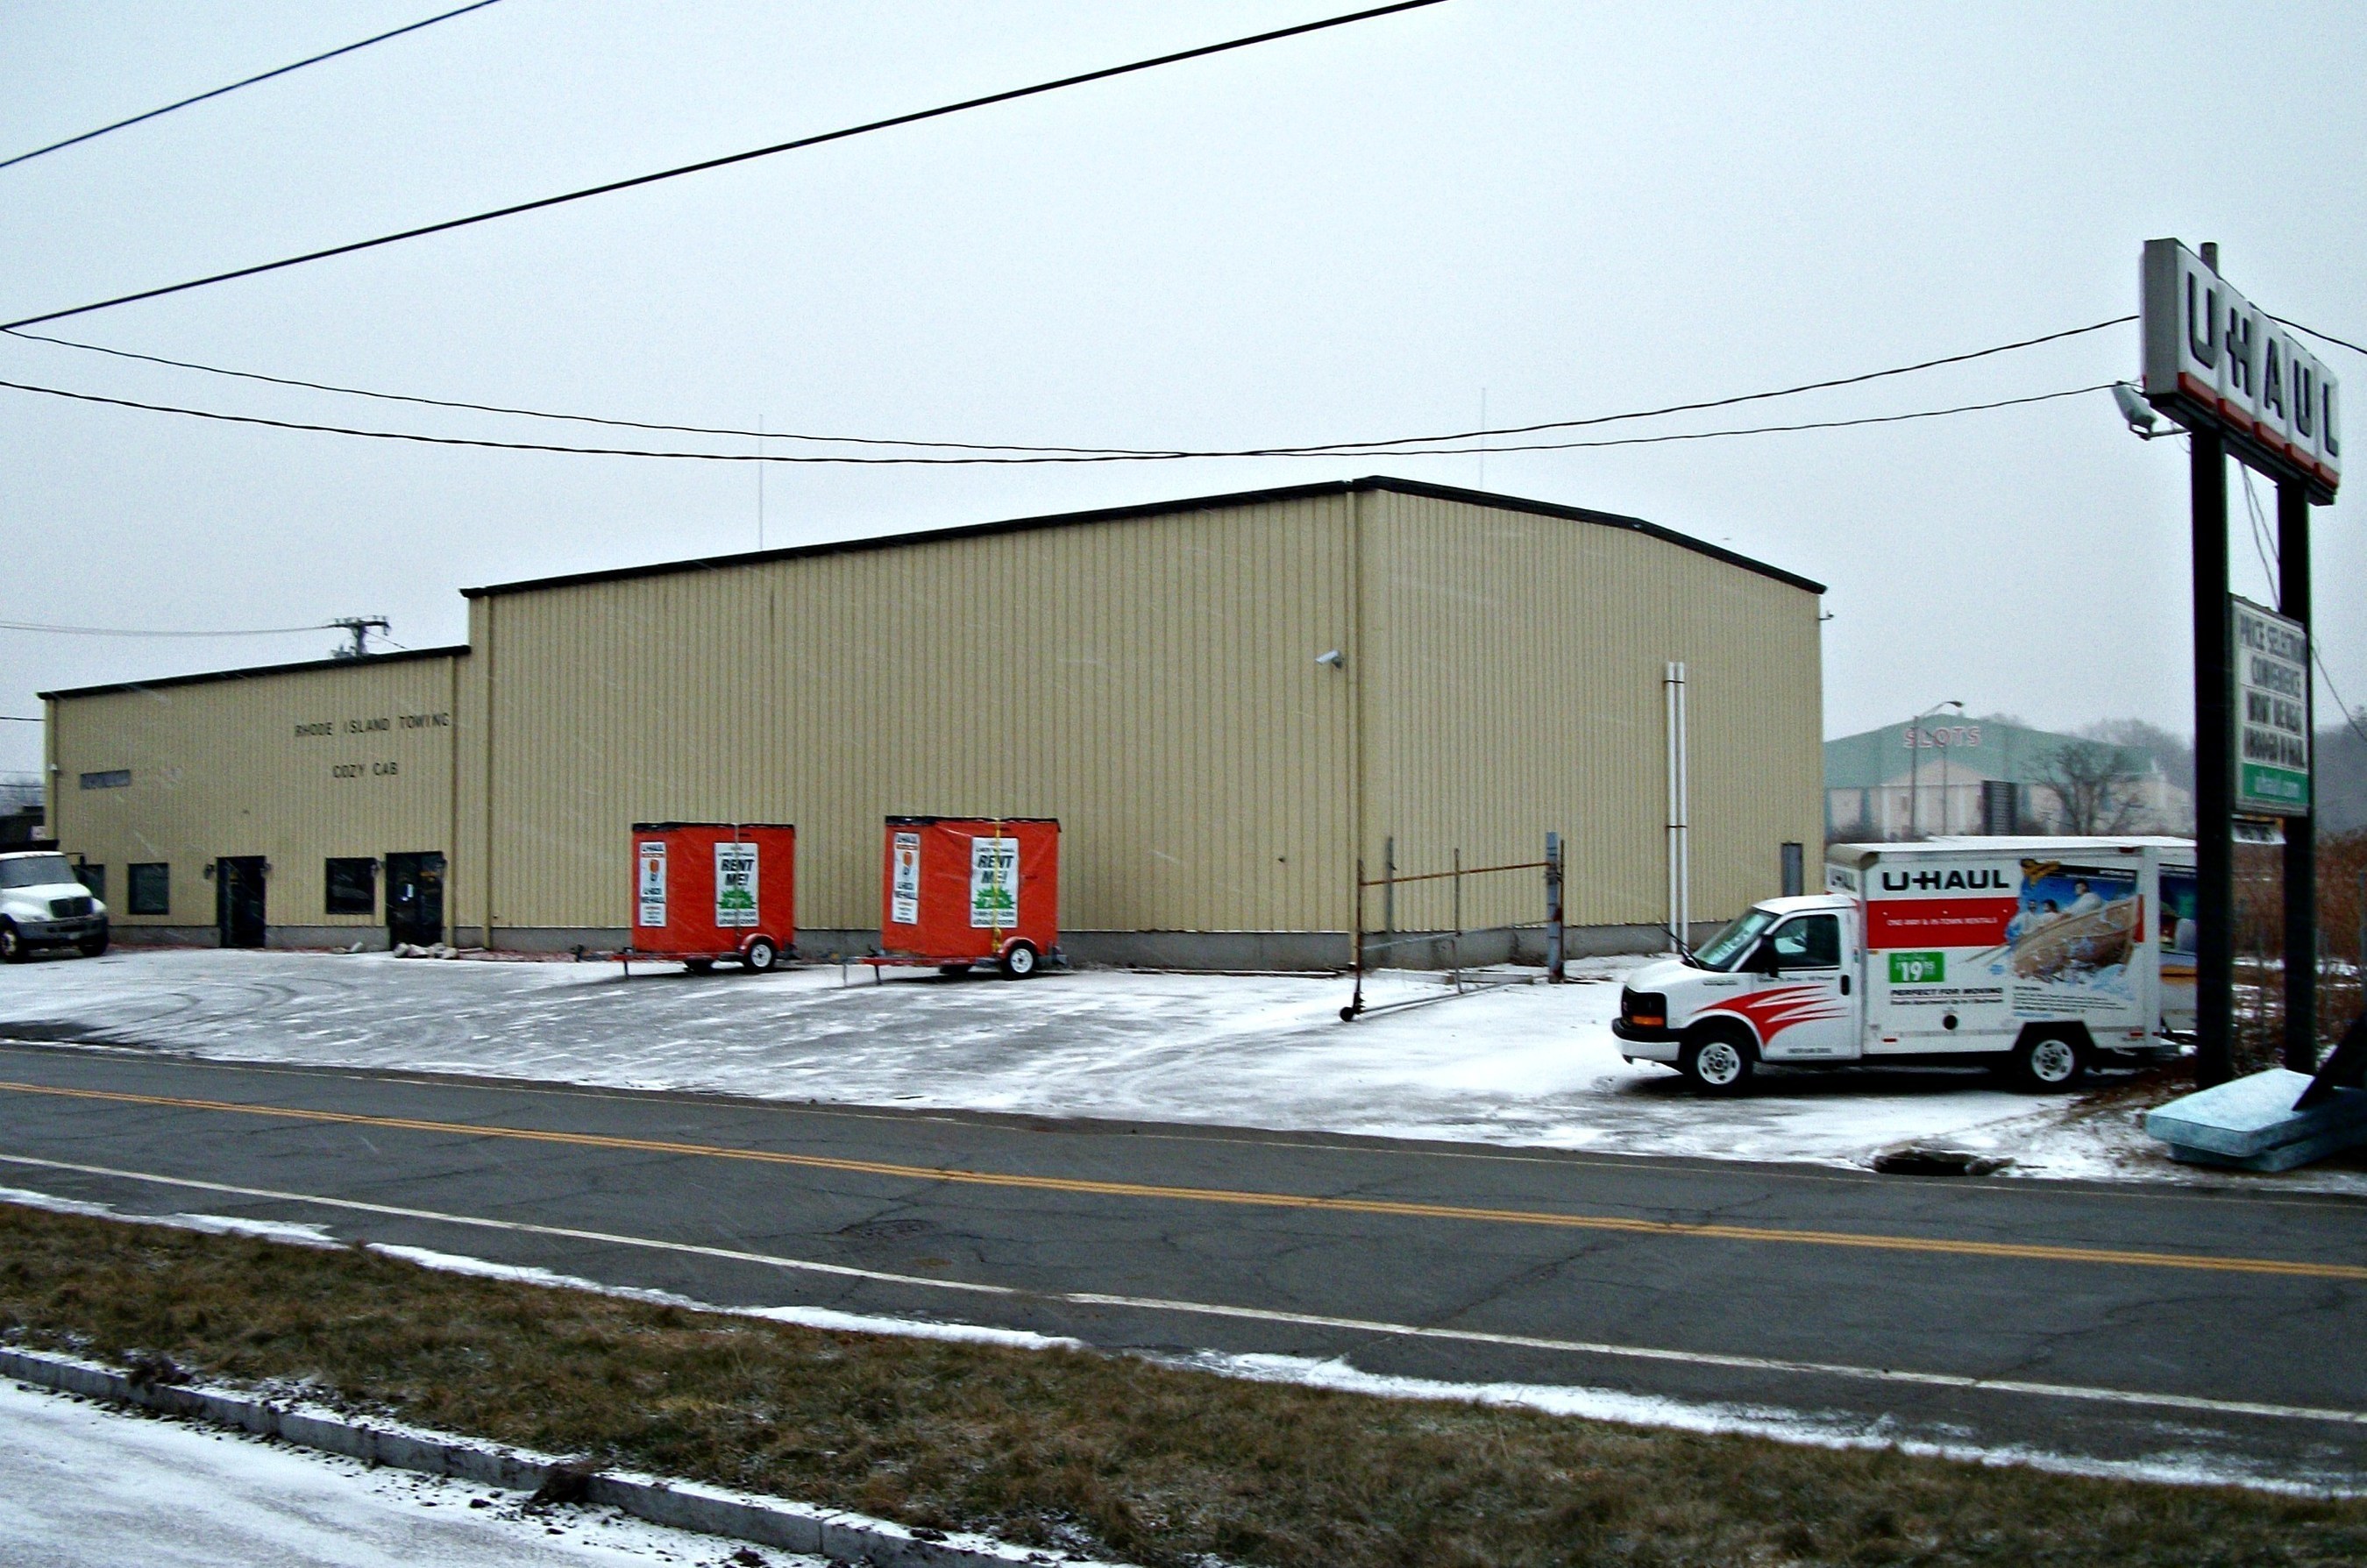 U-Haul customers in and around Newport will soon have more secure and convenient storage options with the forthcoming expansion at U-Haul Moving & Storage of Newport at 111 Connell Hwy.